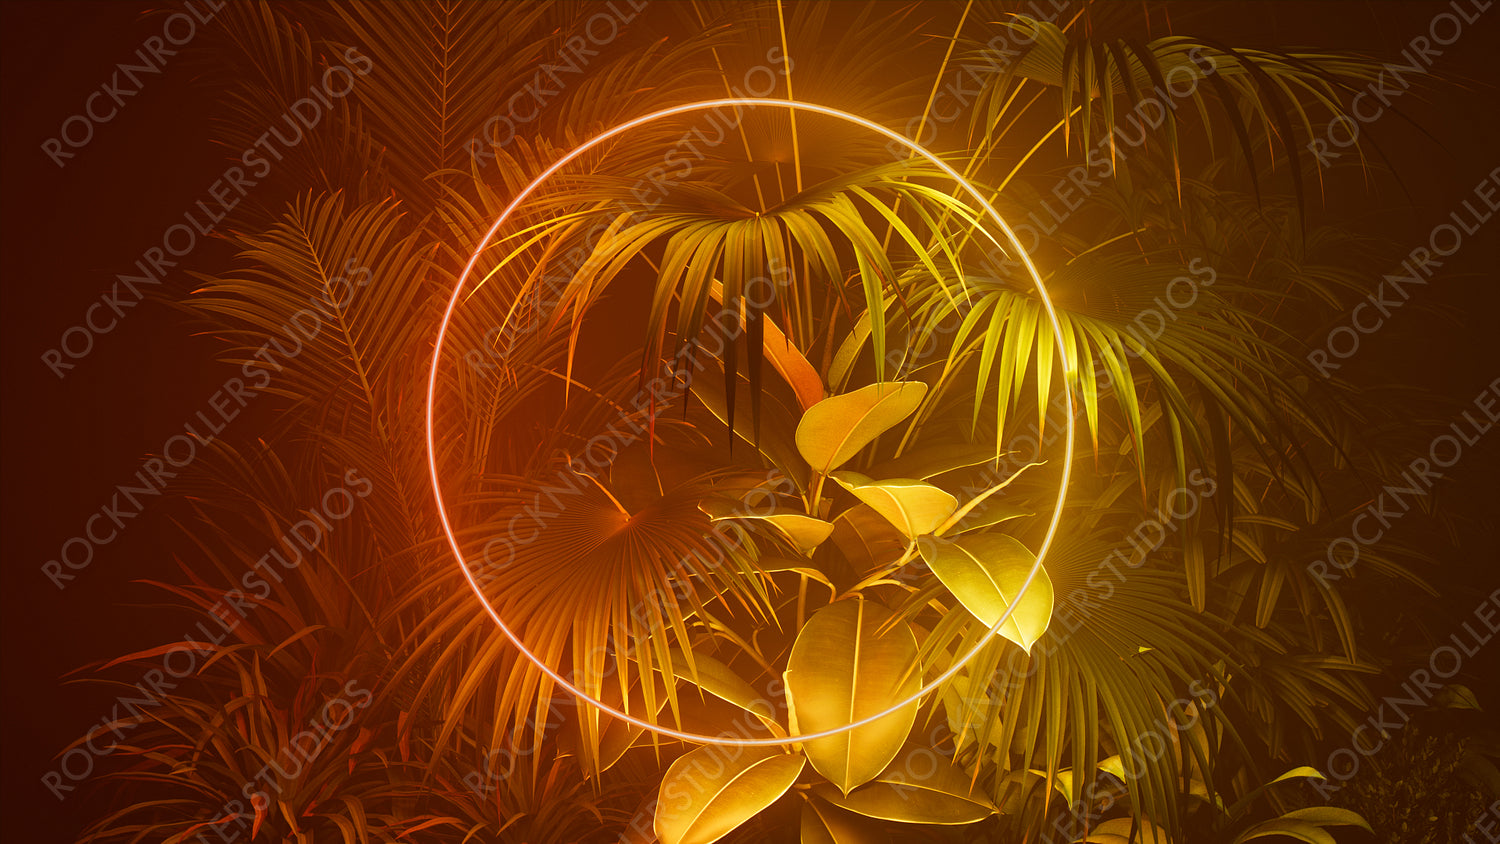 Tropical Plants Illuminated with Orange and Yellow Fluorescent Light. Nature Environment with Circle shaped Neon Frame.